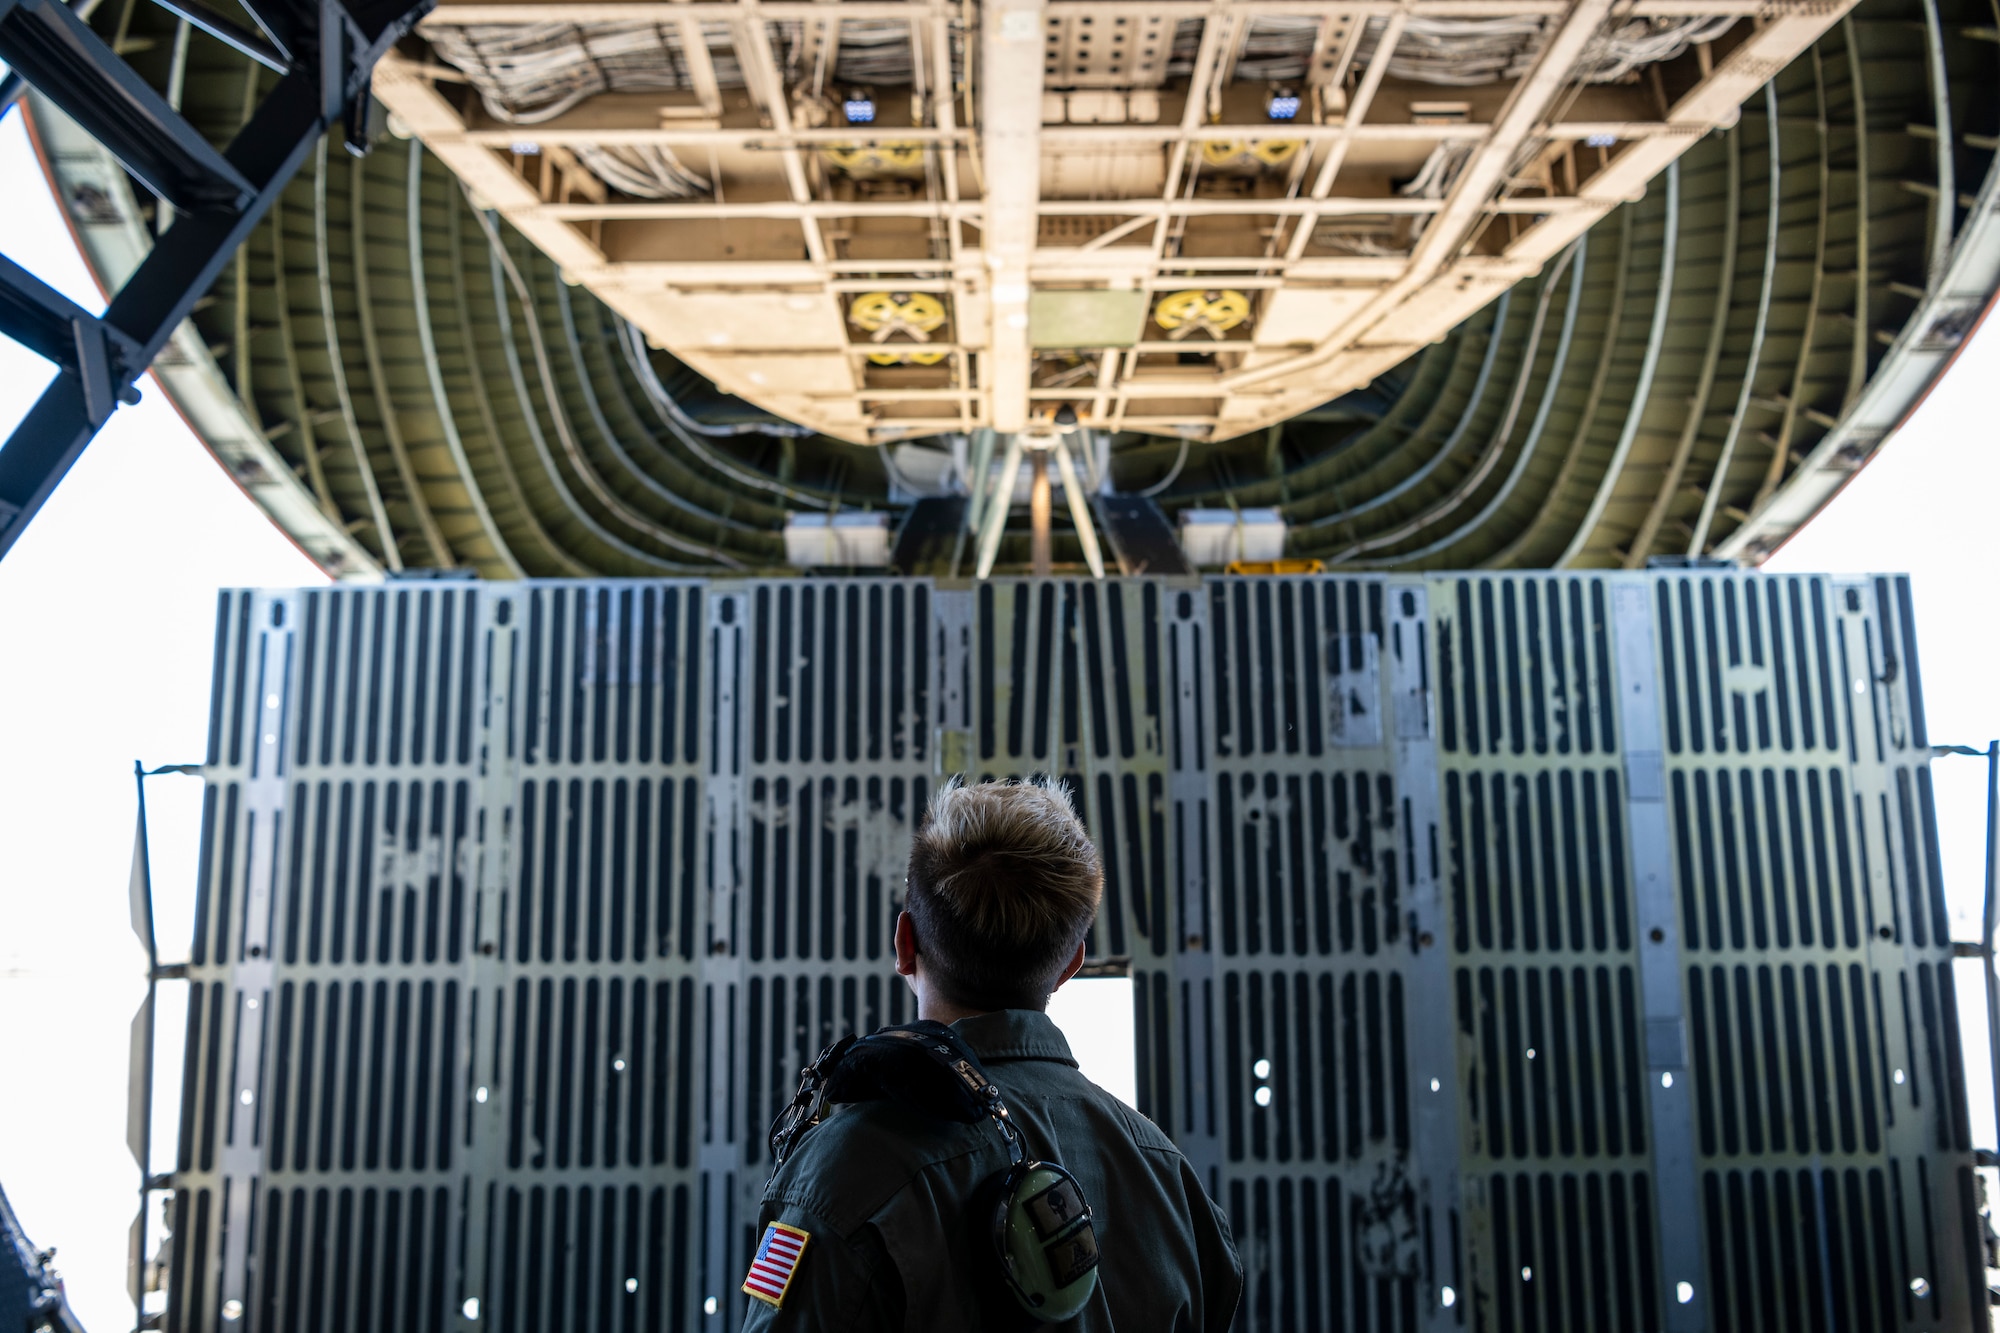 A woman in a flight suit watches a large door open on a large military airplane.